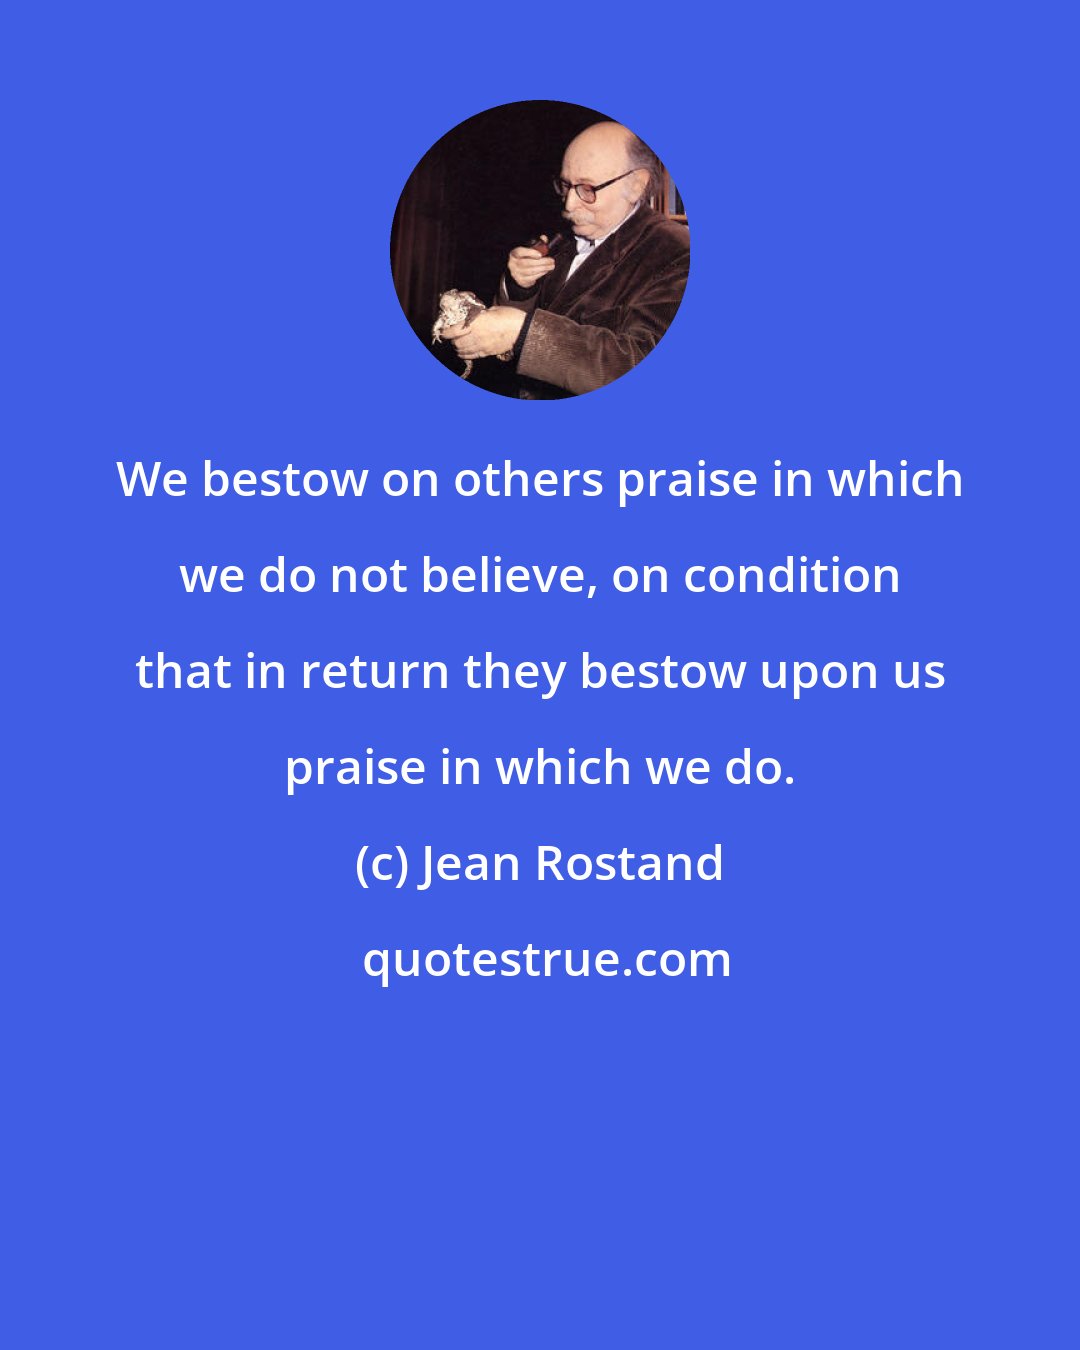 Jean Rostand: We bestow on others praise in which we do not believe, on condition that in return they bestow upon us praise in which we do.